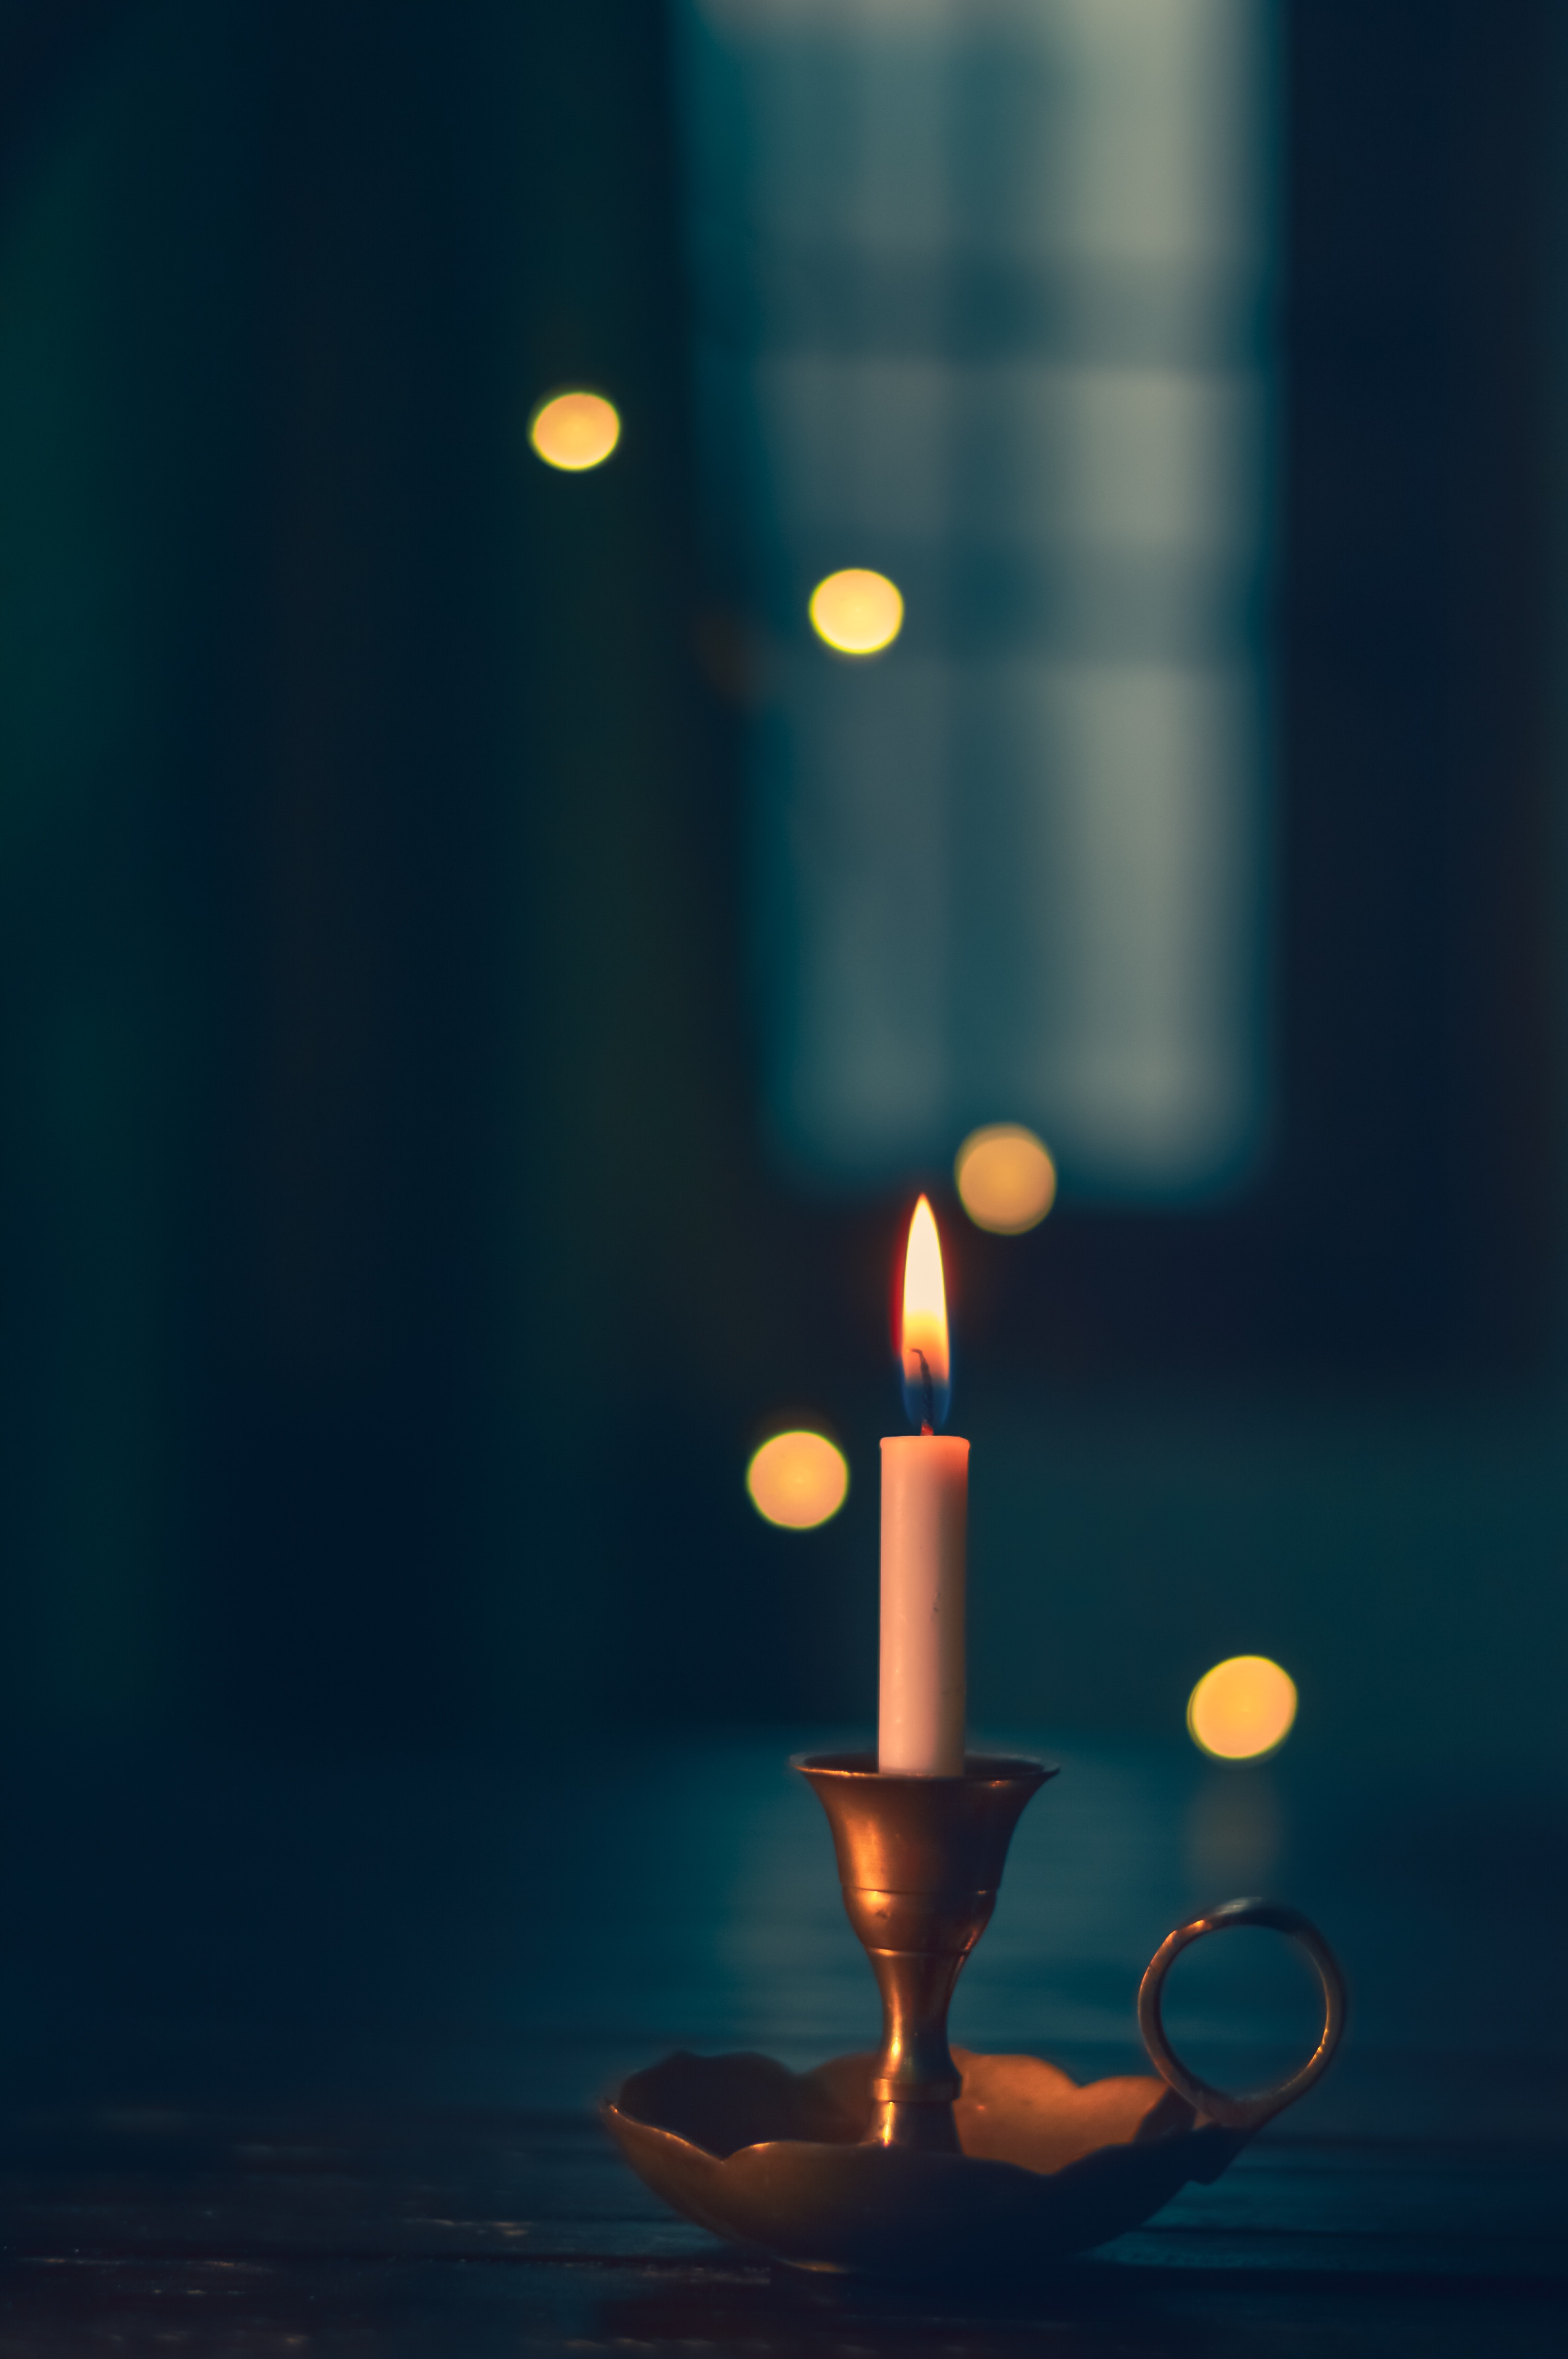 blur, miscellanea, candle, fire, wax, miscellaneous, smooth, wick, candlestick iphone wallpaper